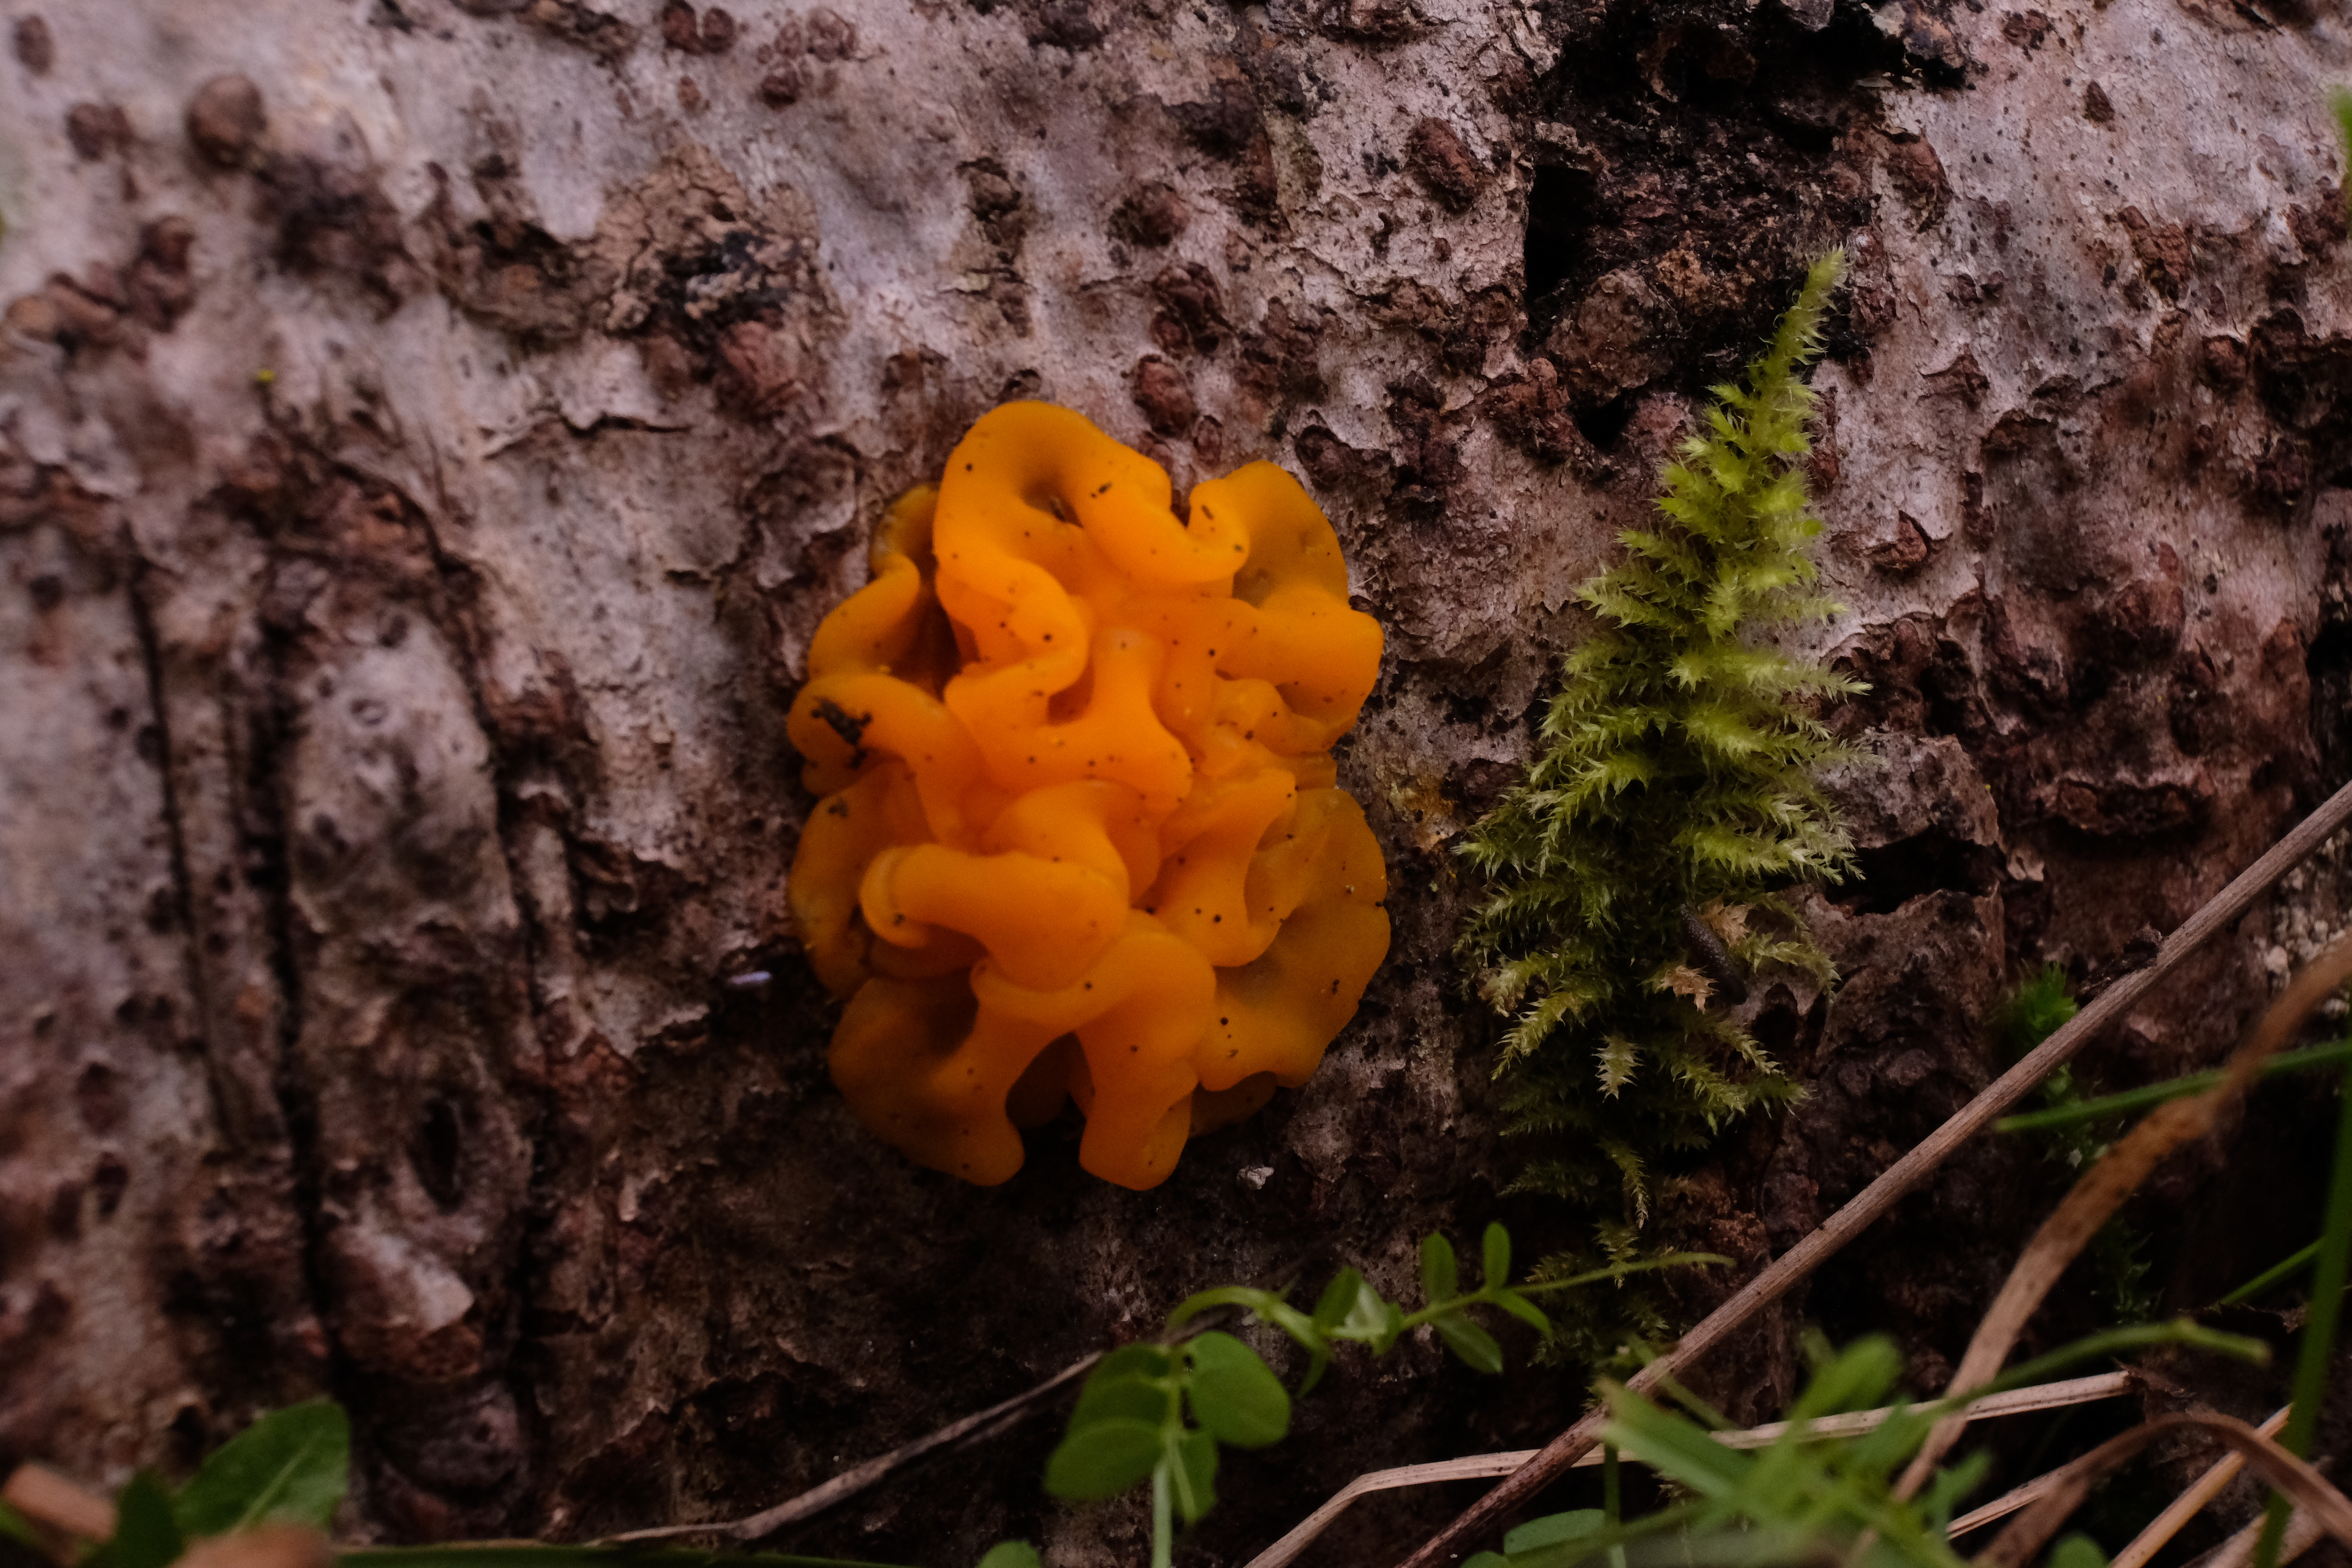 jelly fungus witches butter macro photo of orange jelly slime mold mossy log saint edward state park seattle washington photo by Anna Snook